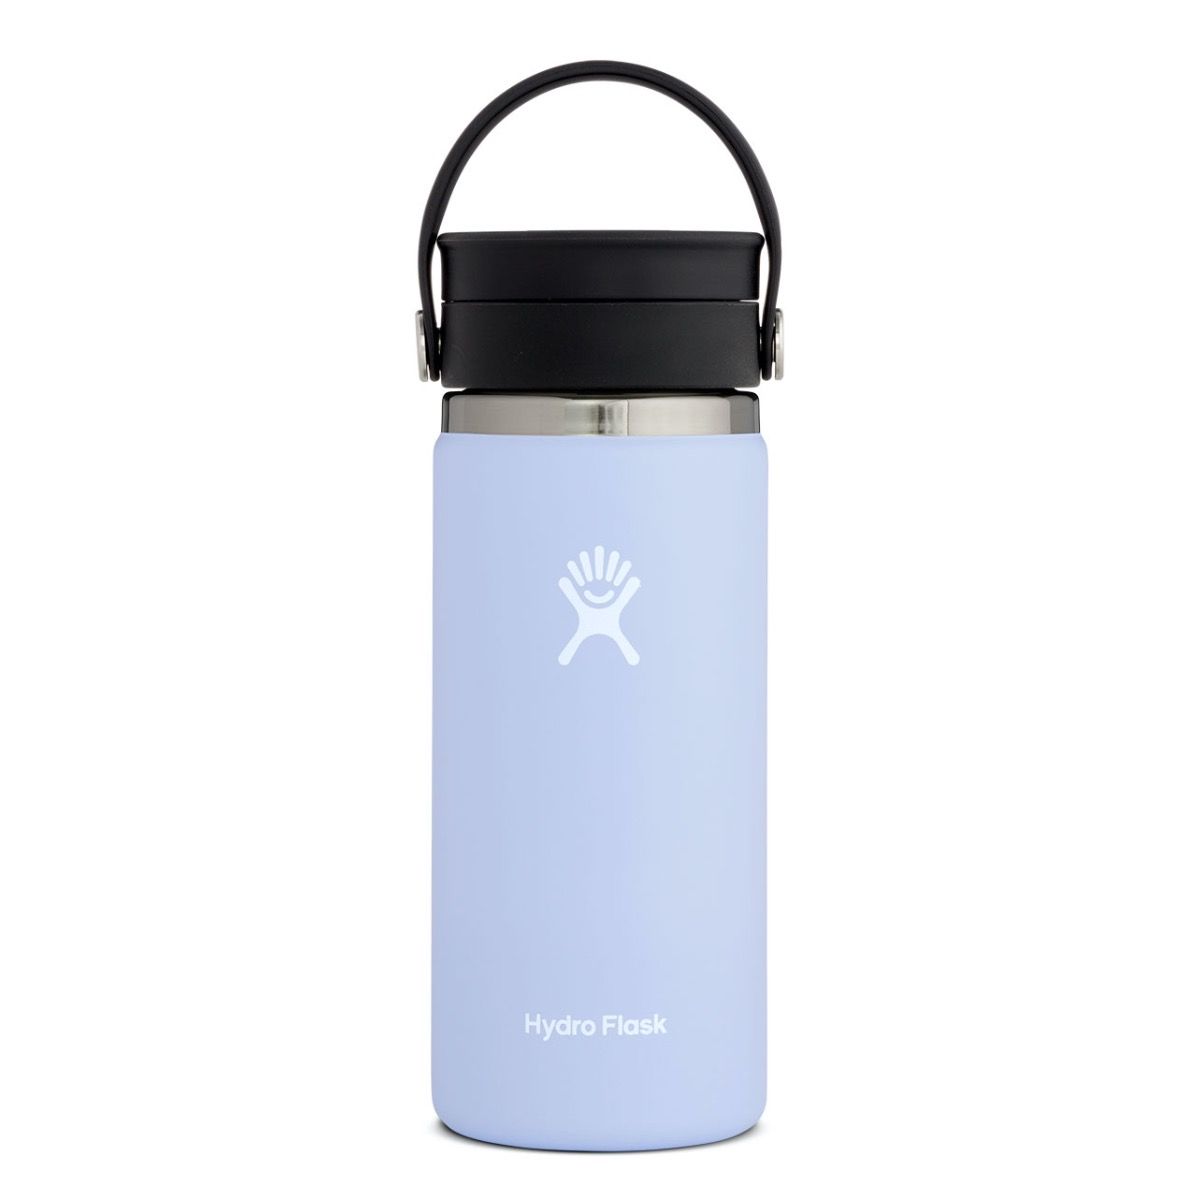 hydro flask 16oz coffee with flex sip lid clearance 